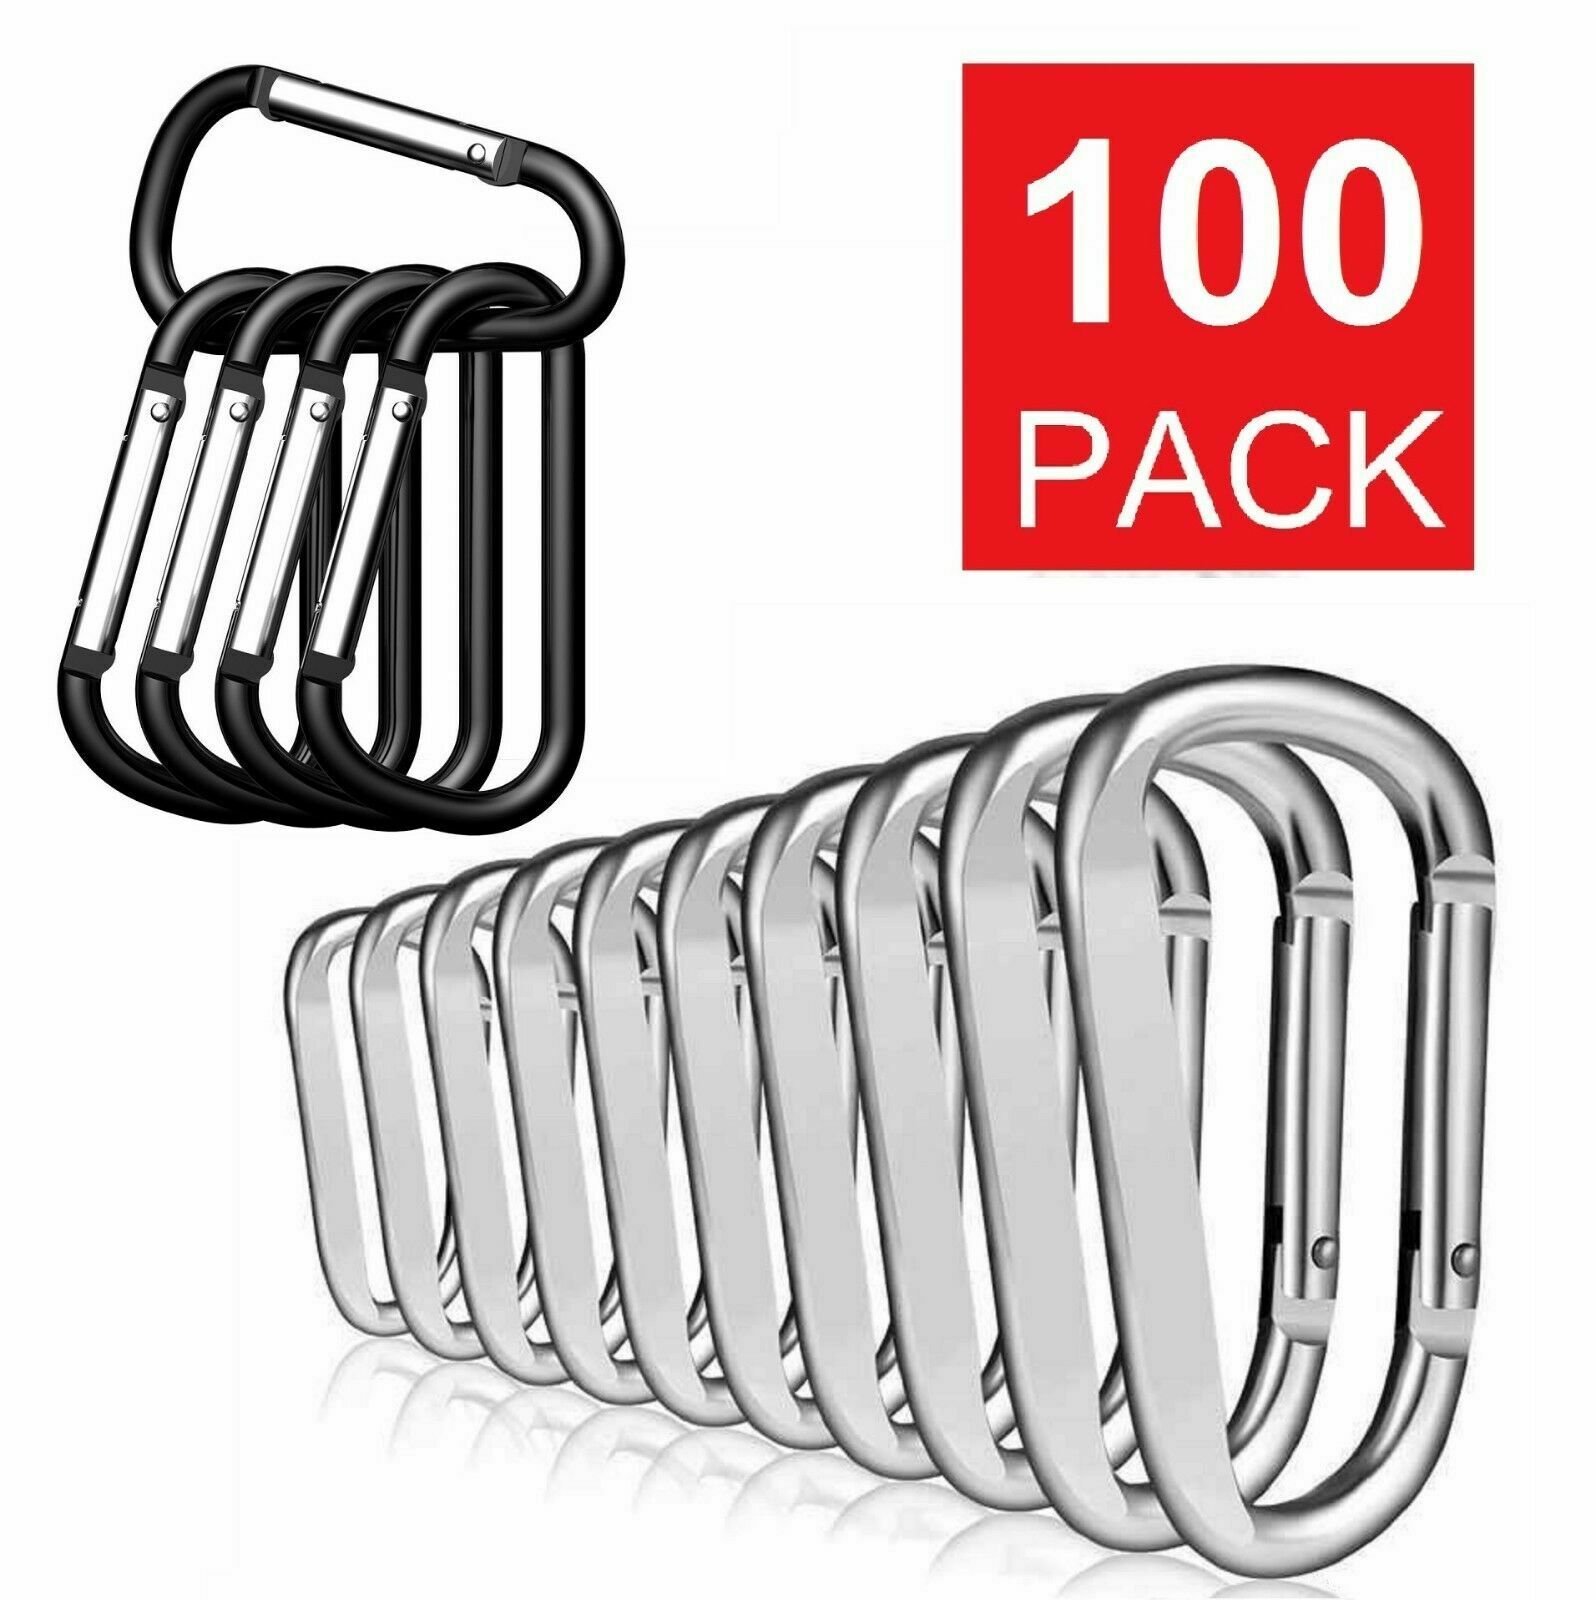 Free ship! 20 Pack 2” Black & Silver Aluminum Carabiner Clips New 